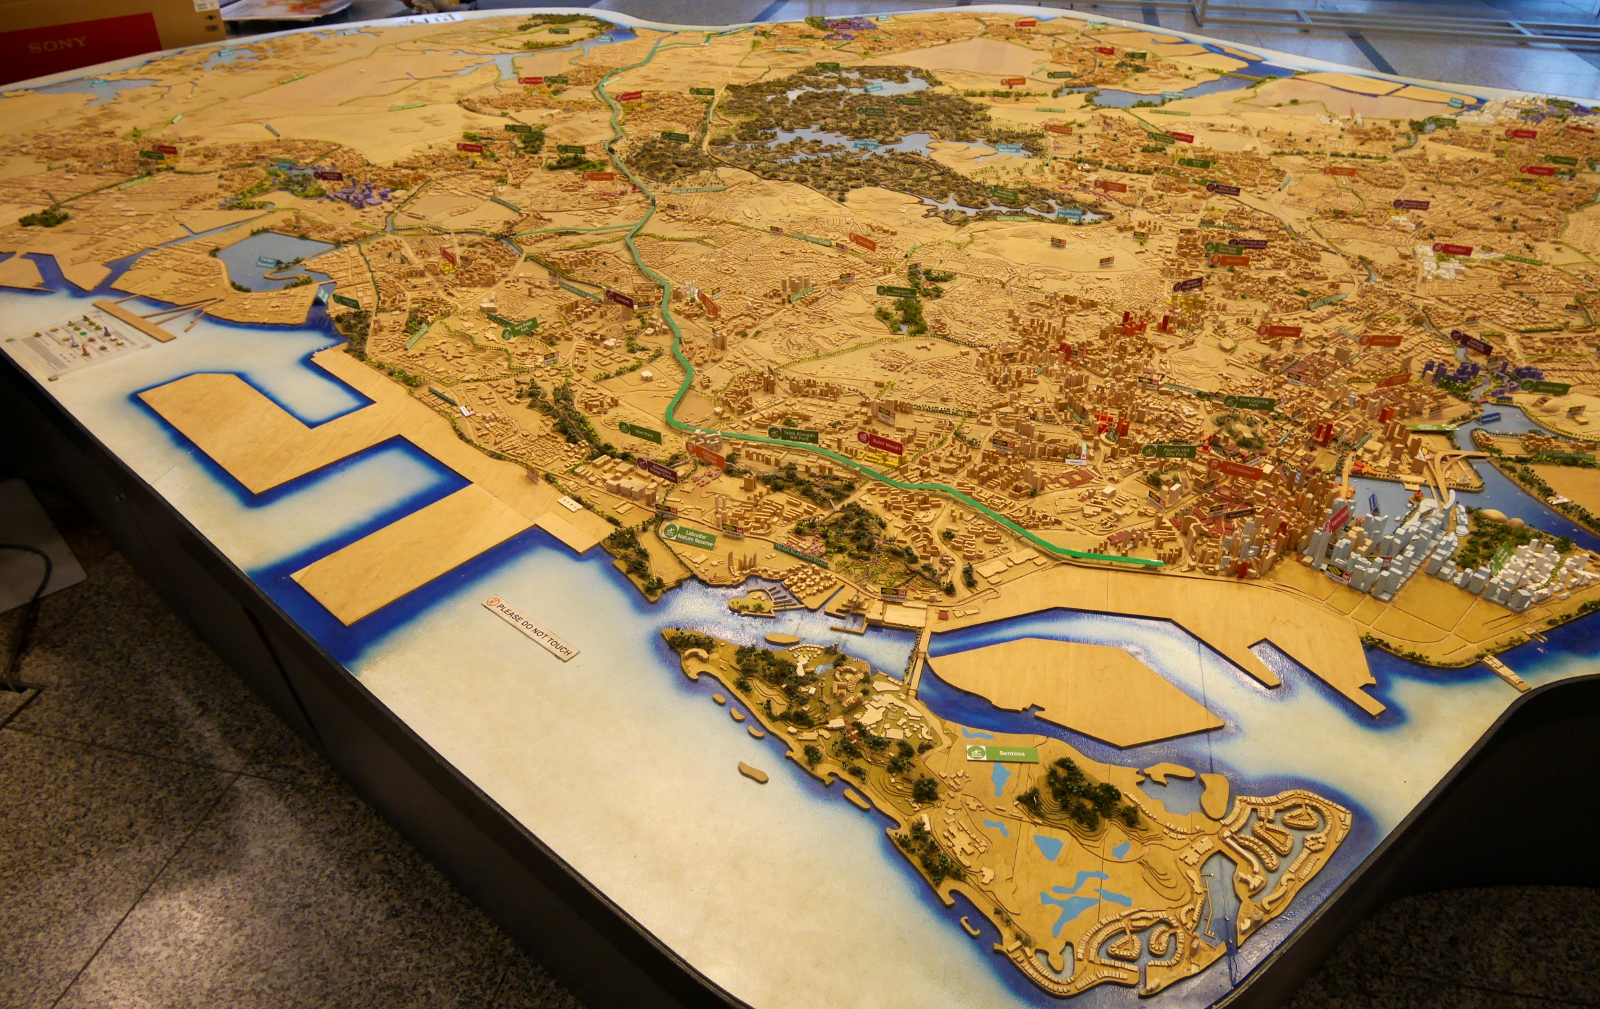 Scale model of the entire nation of Singapore, in the Singapore City Gallery.